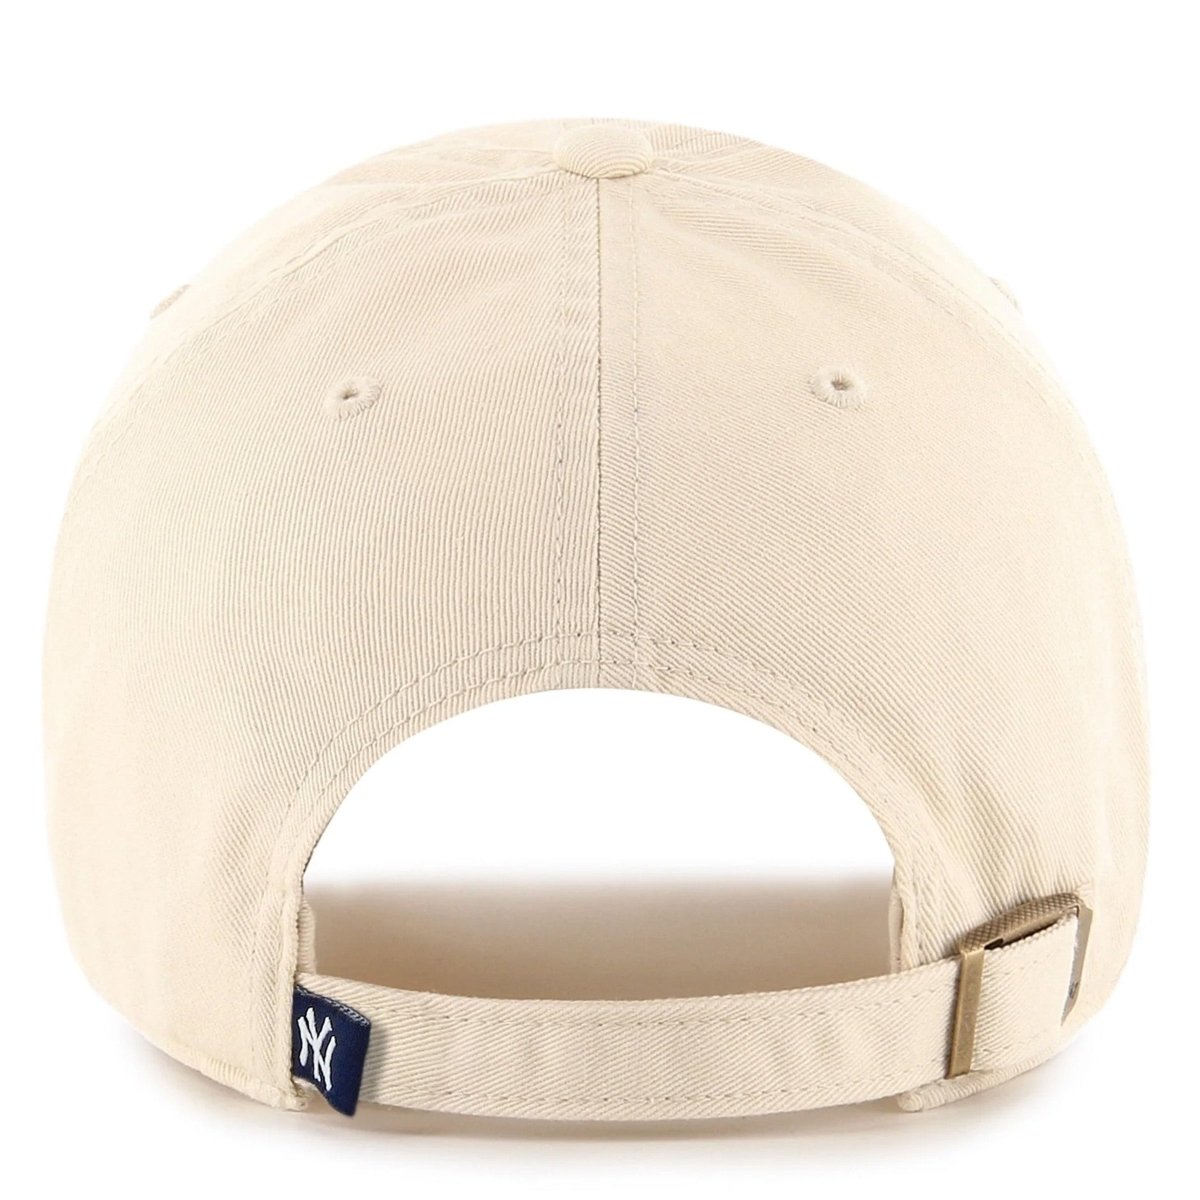 47 BRAND Clean Up Cap - NY White